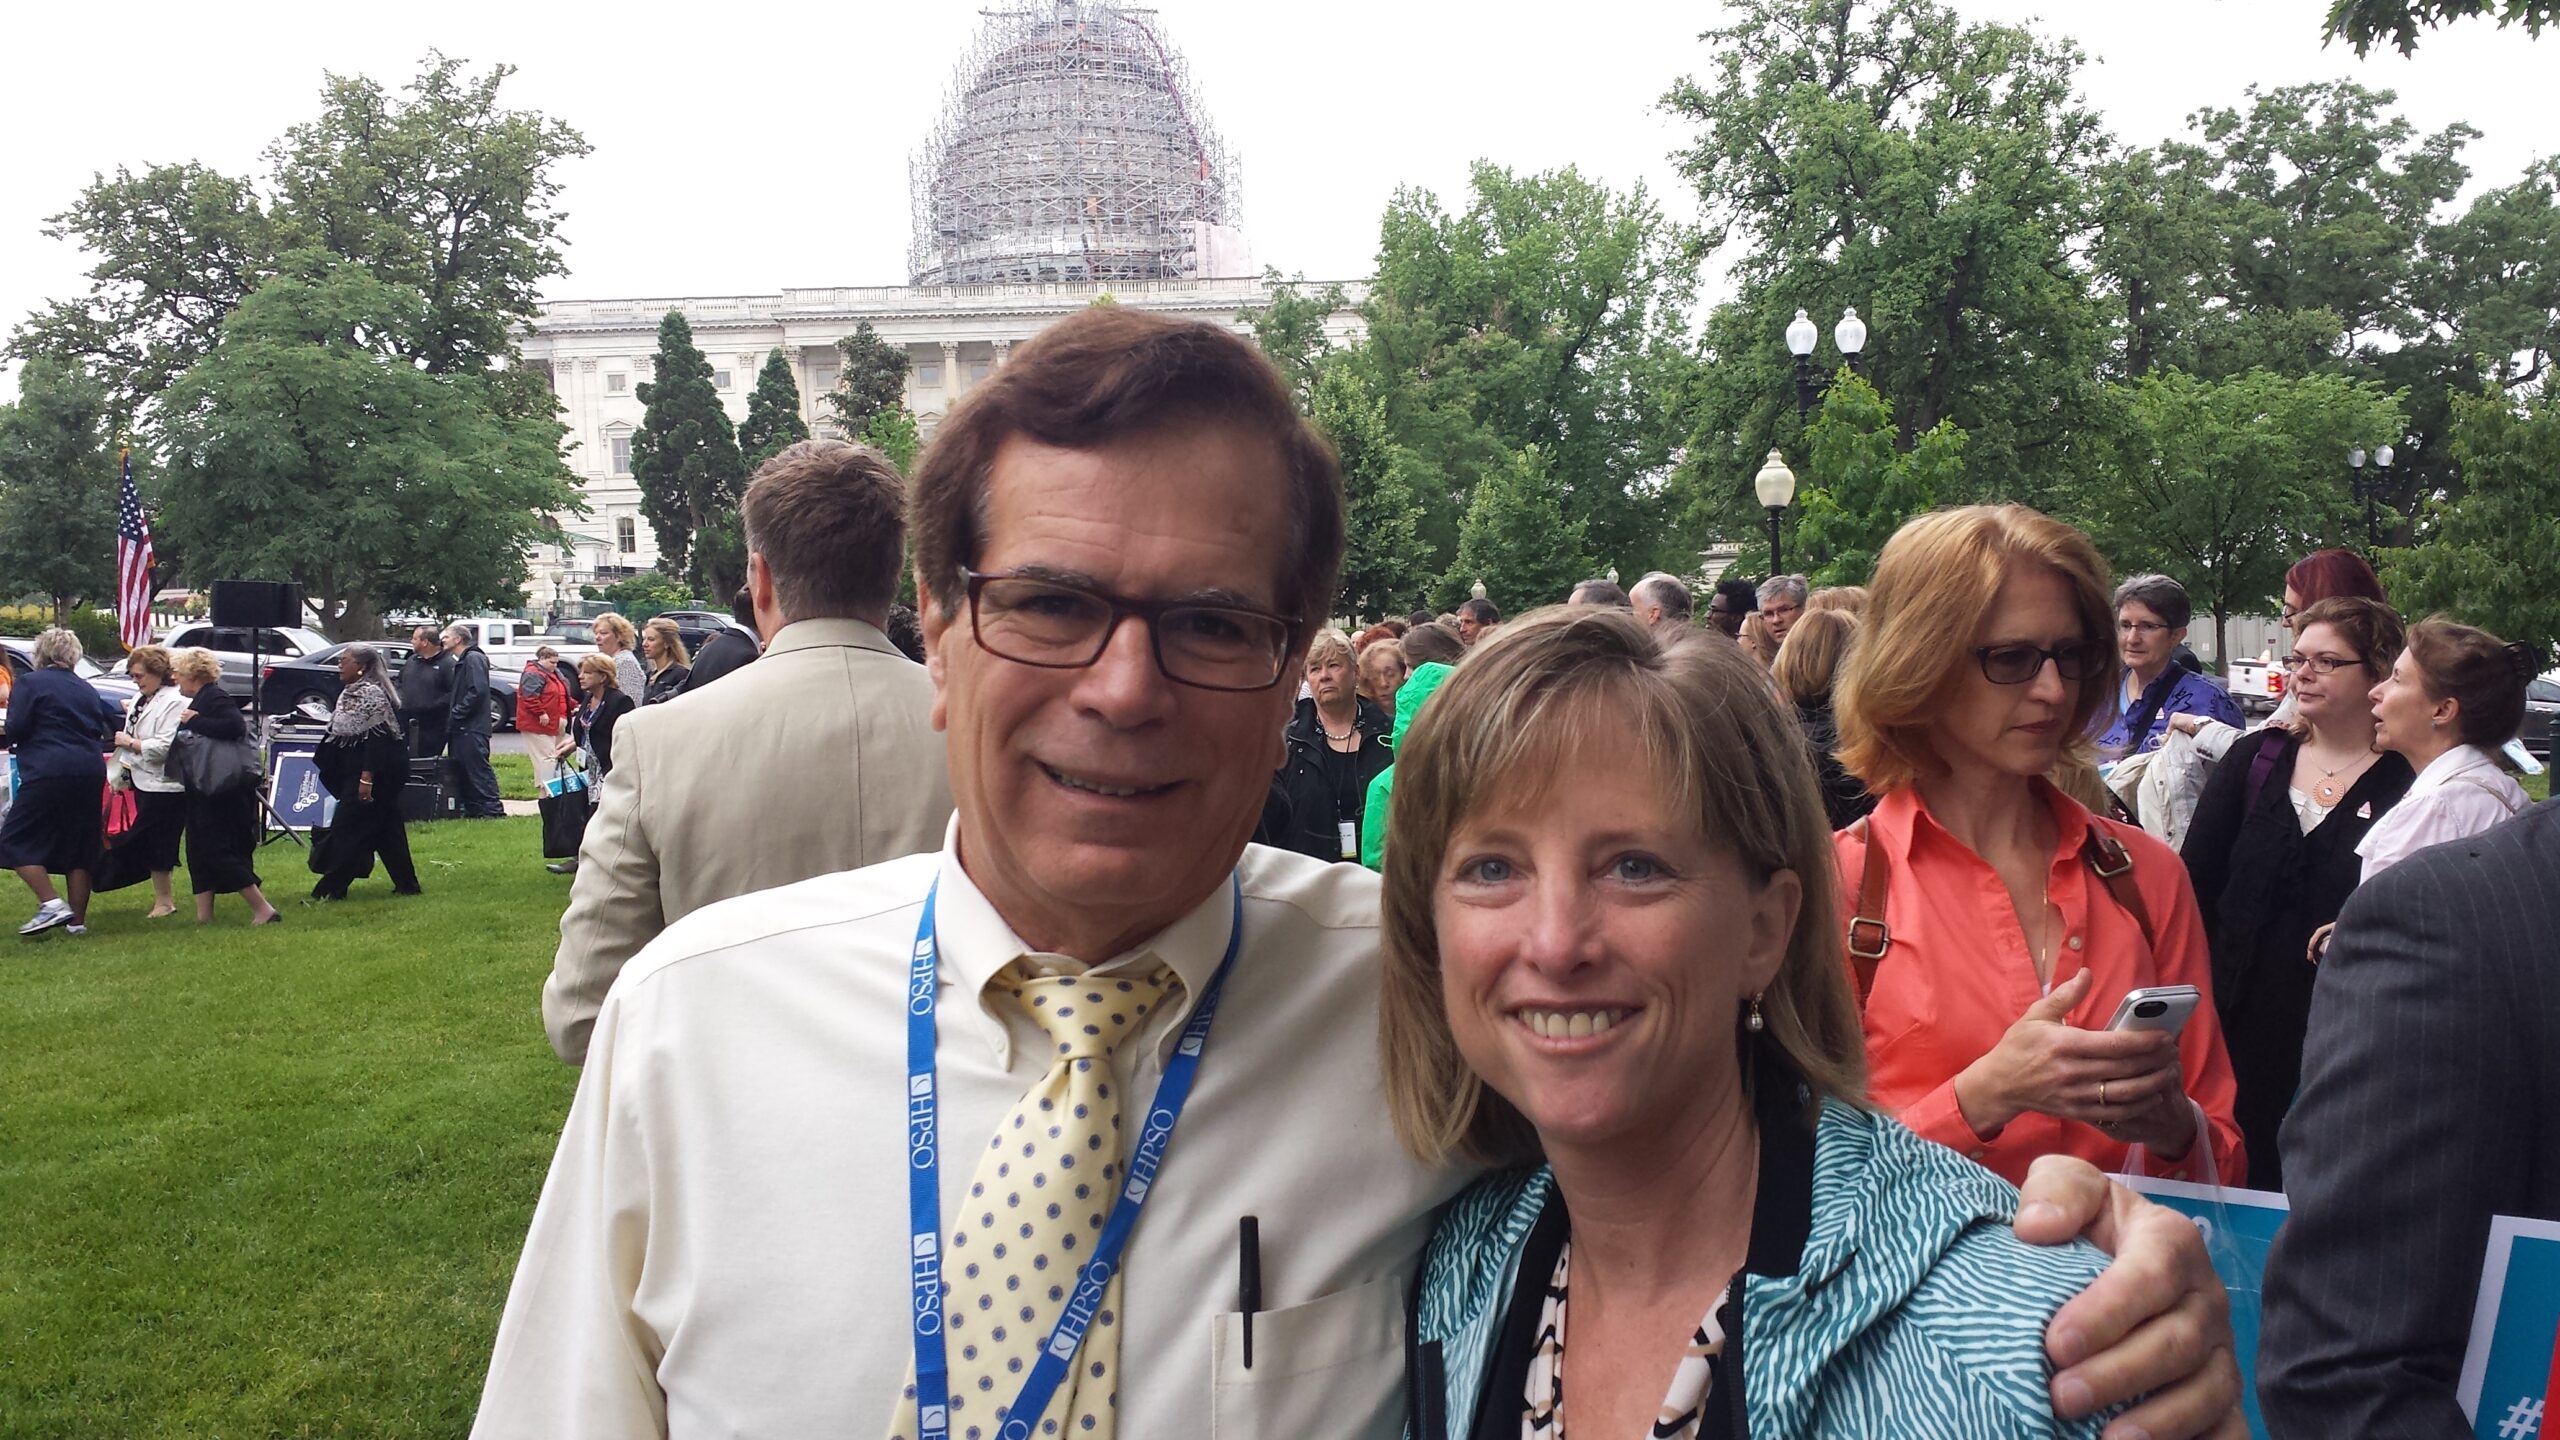 Joe Lucca and Stacie Larkin at "Rally on the Hill"